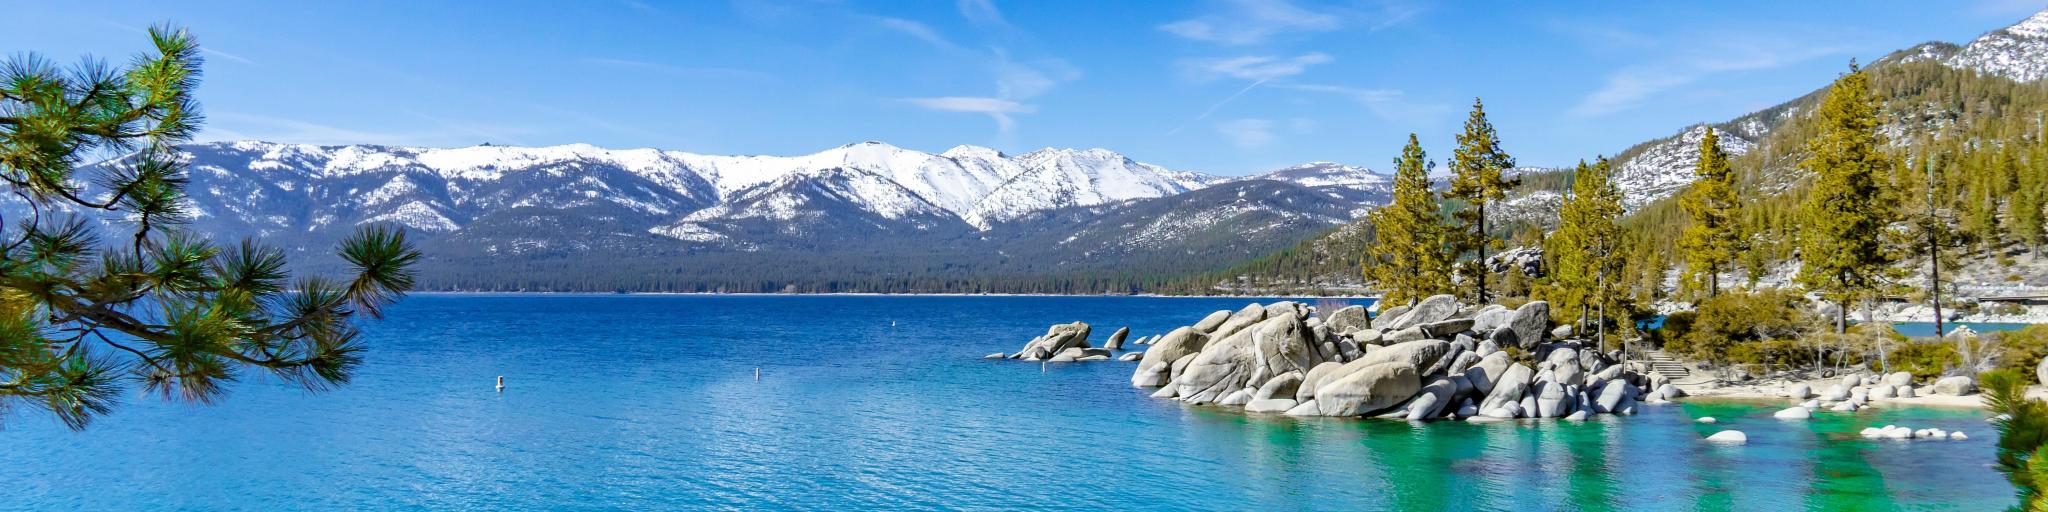 Clear Lake Tahoe on a clear day with snow-capped mountains in the background